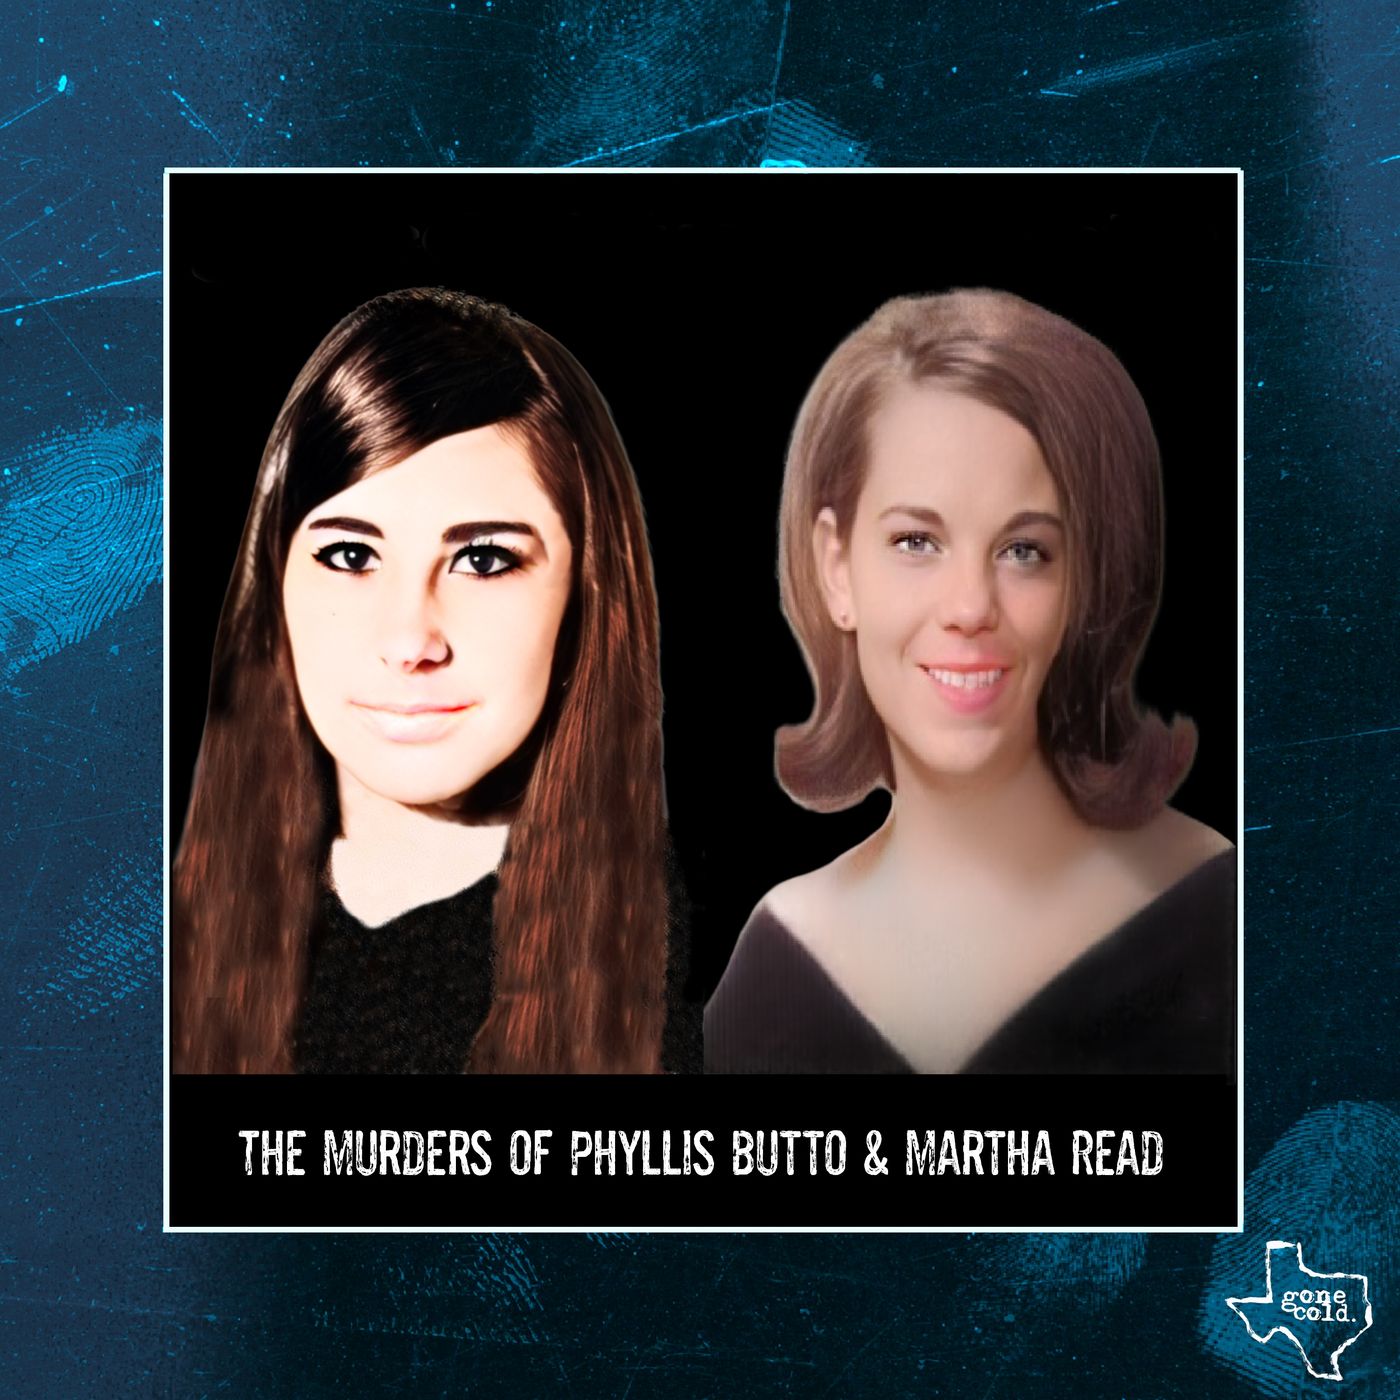 The Murders of Phyllis Butto & Martha Read